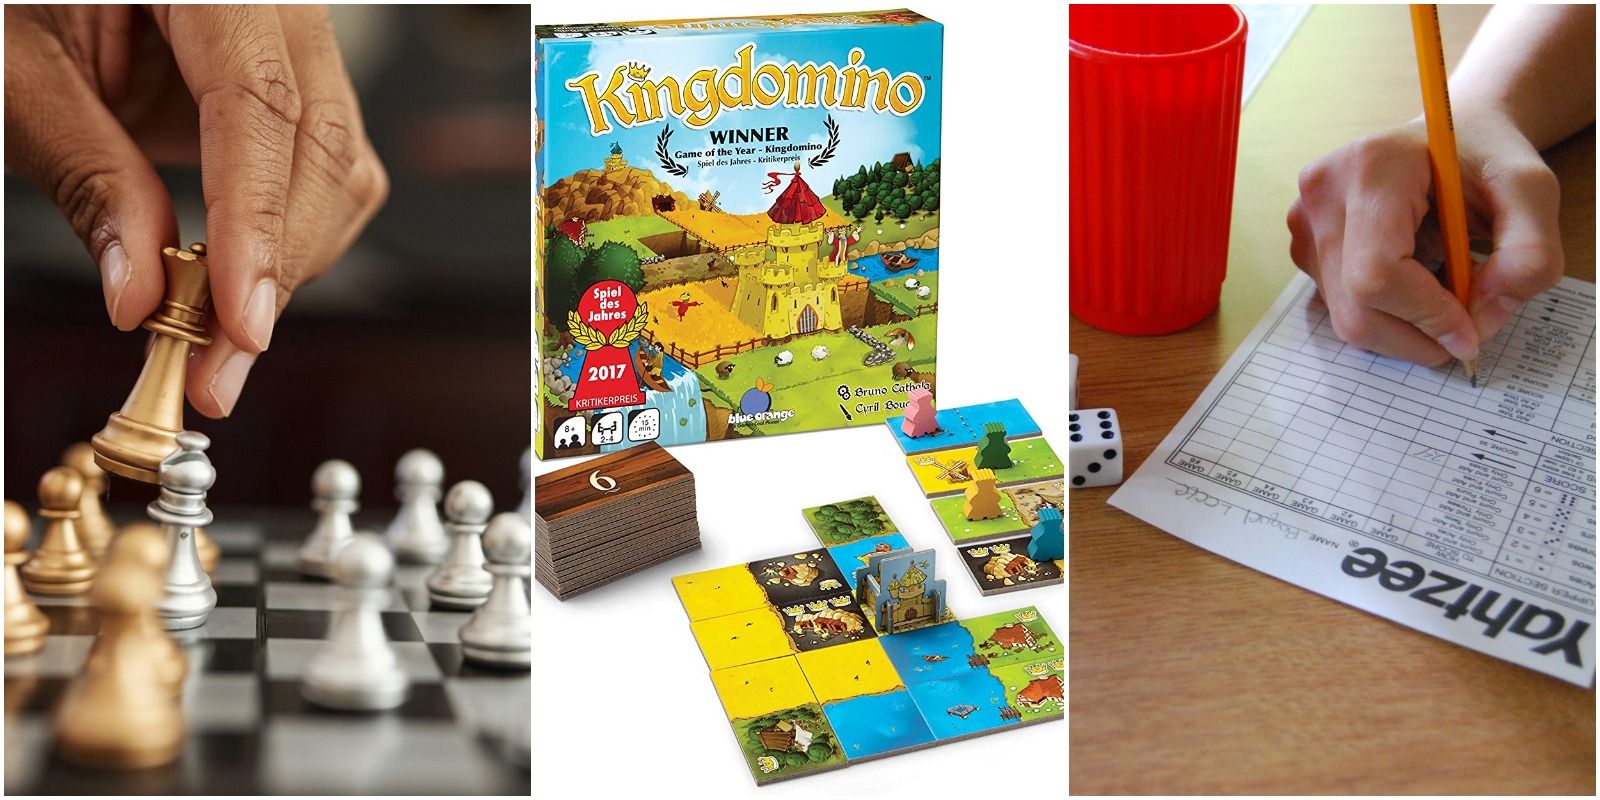 Board game of the year” goes to Kingdomino